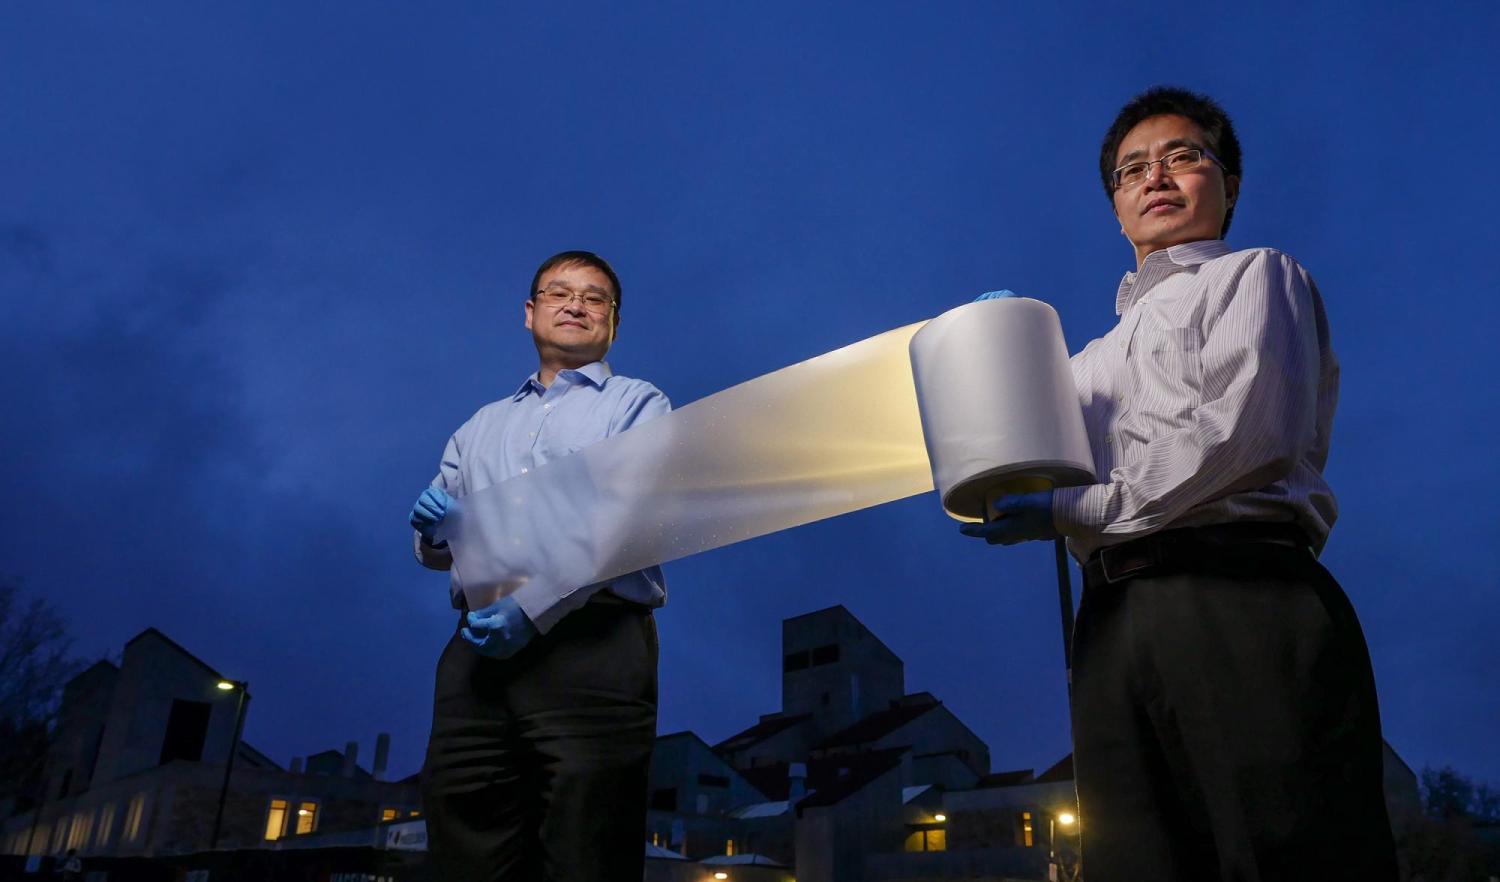 Yang and Yin with roll of cooling material